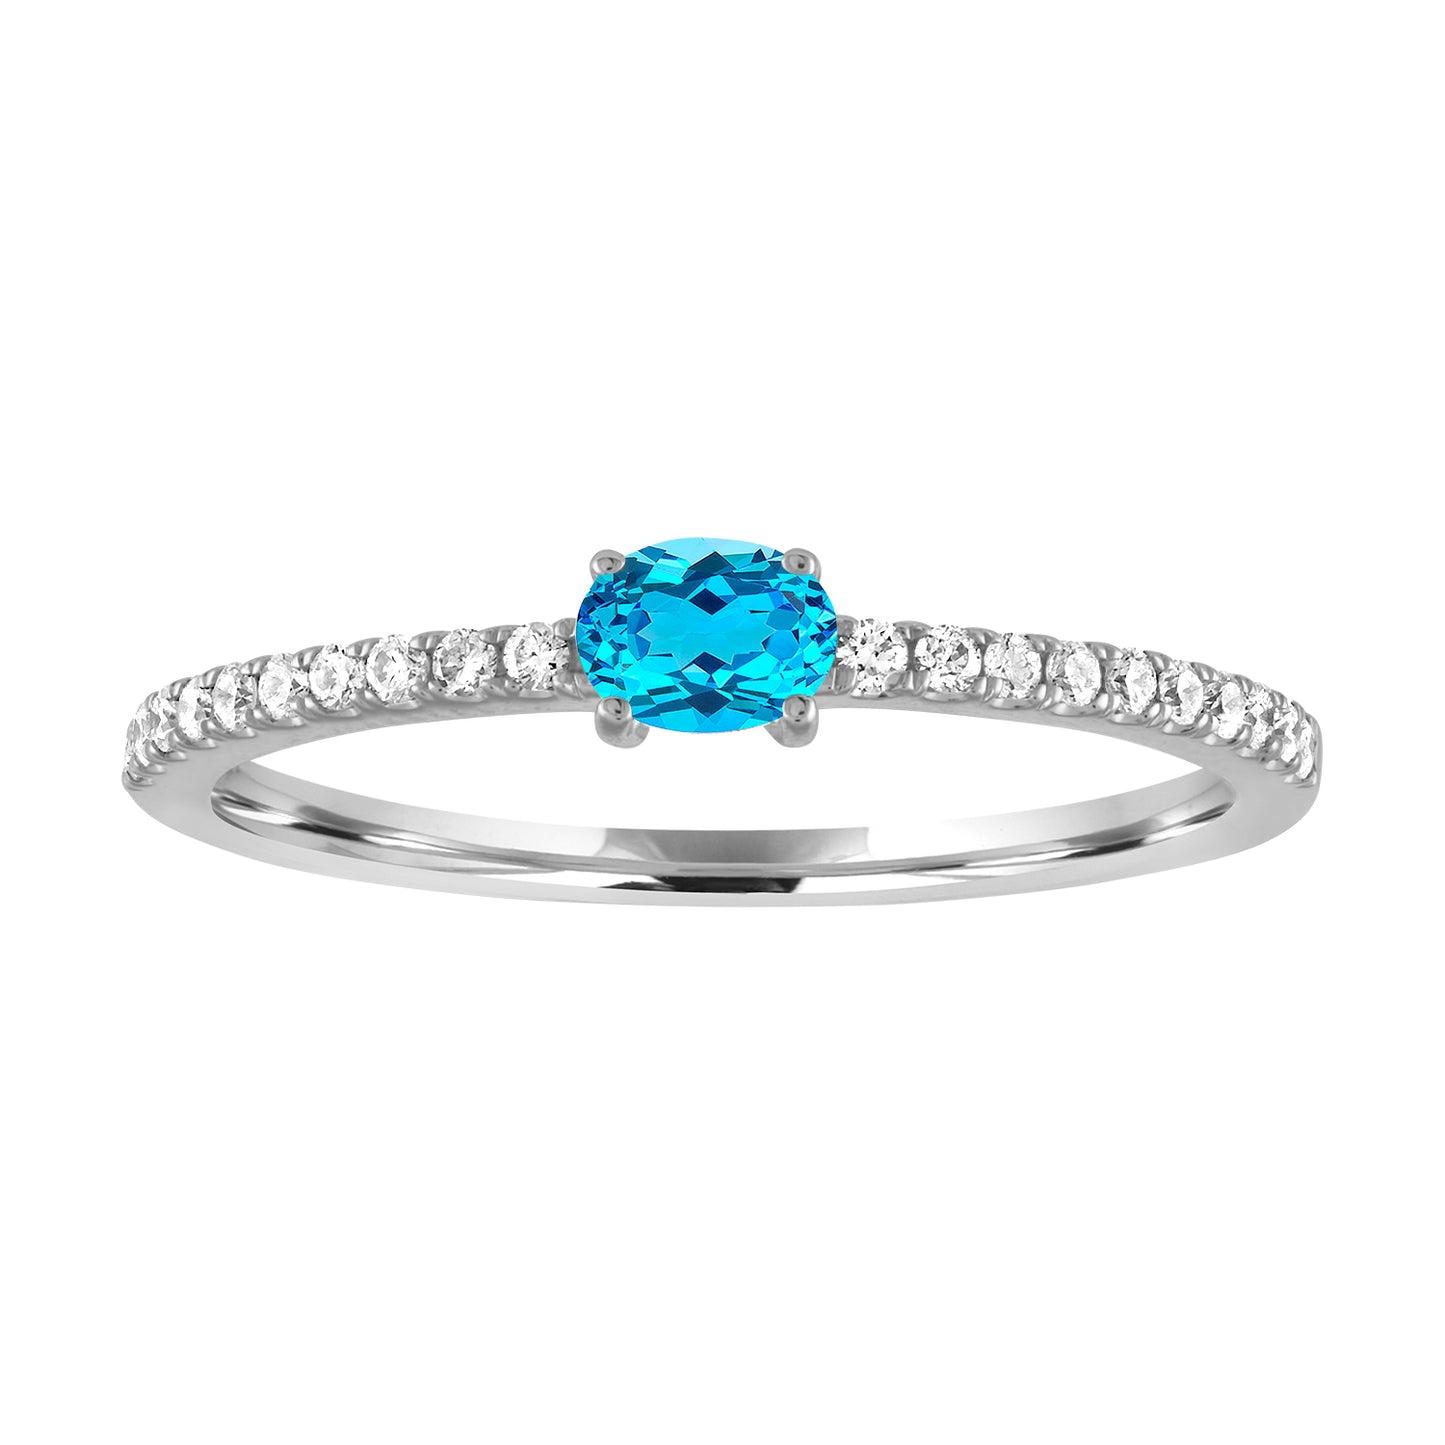 White gold skinny band with an oval blue topaz in the center and round diamonds along the shank.